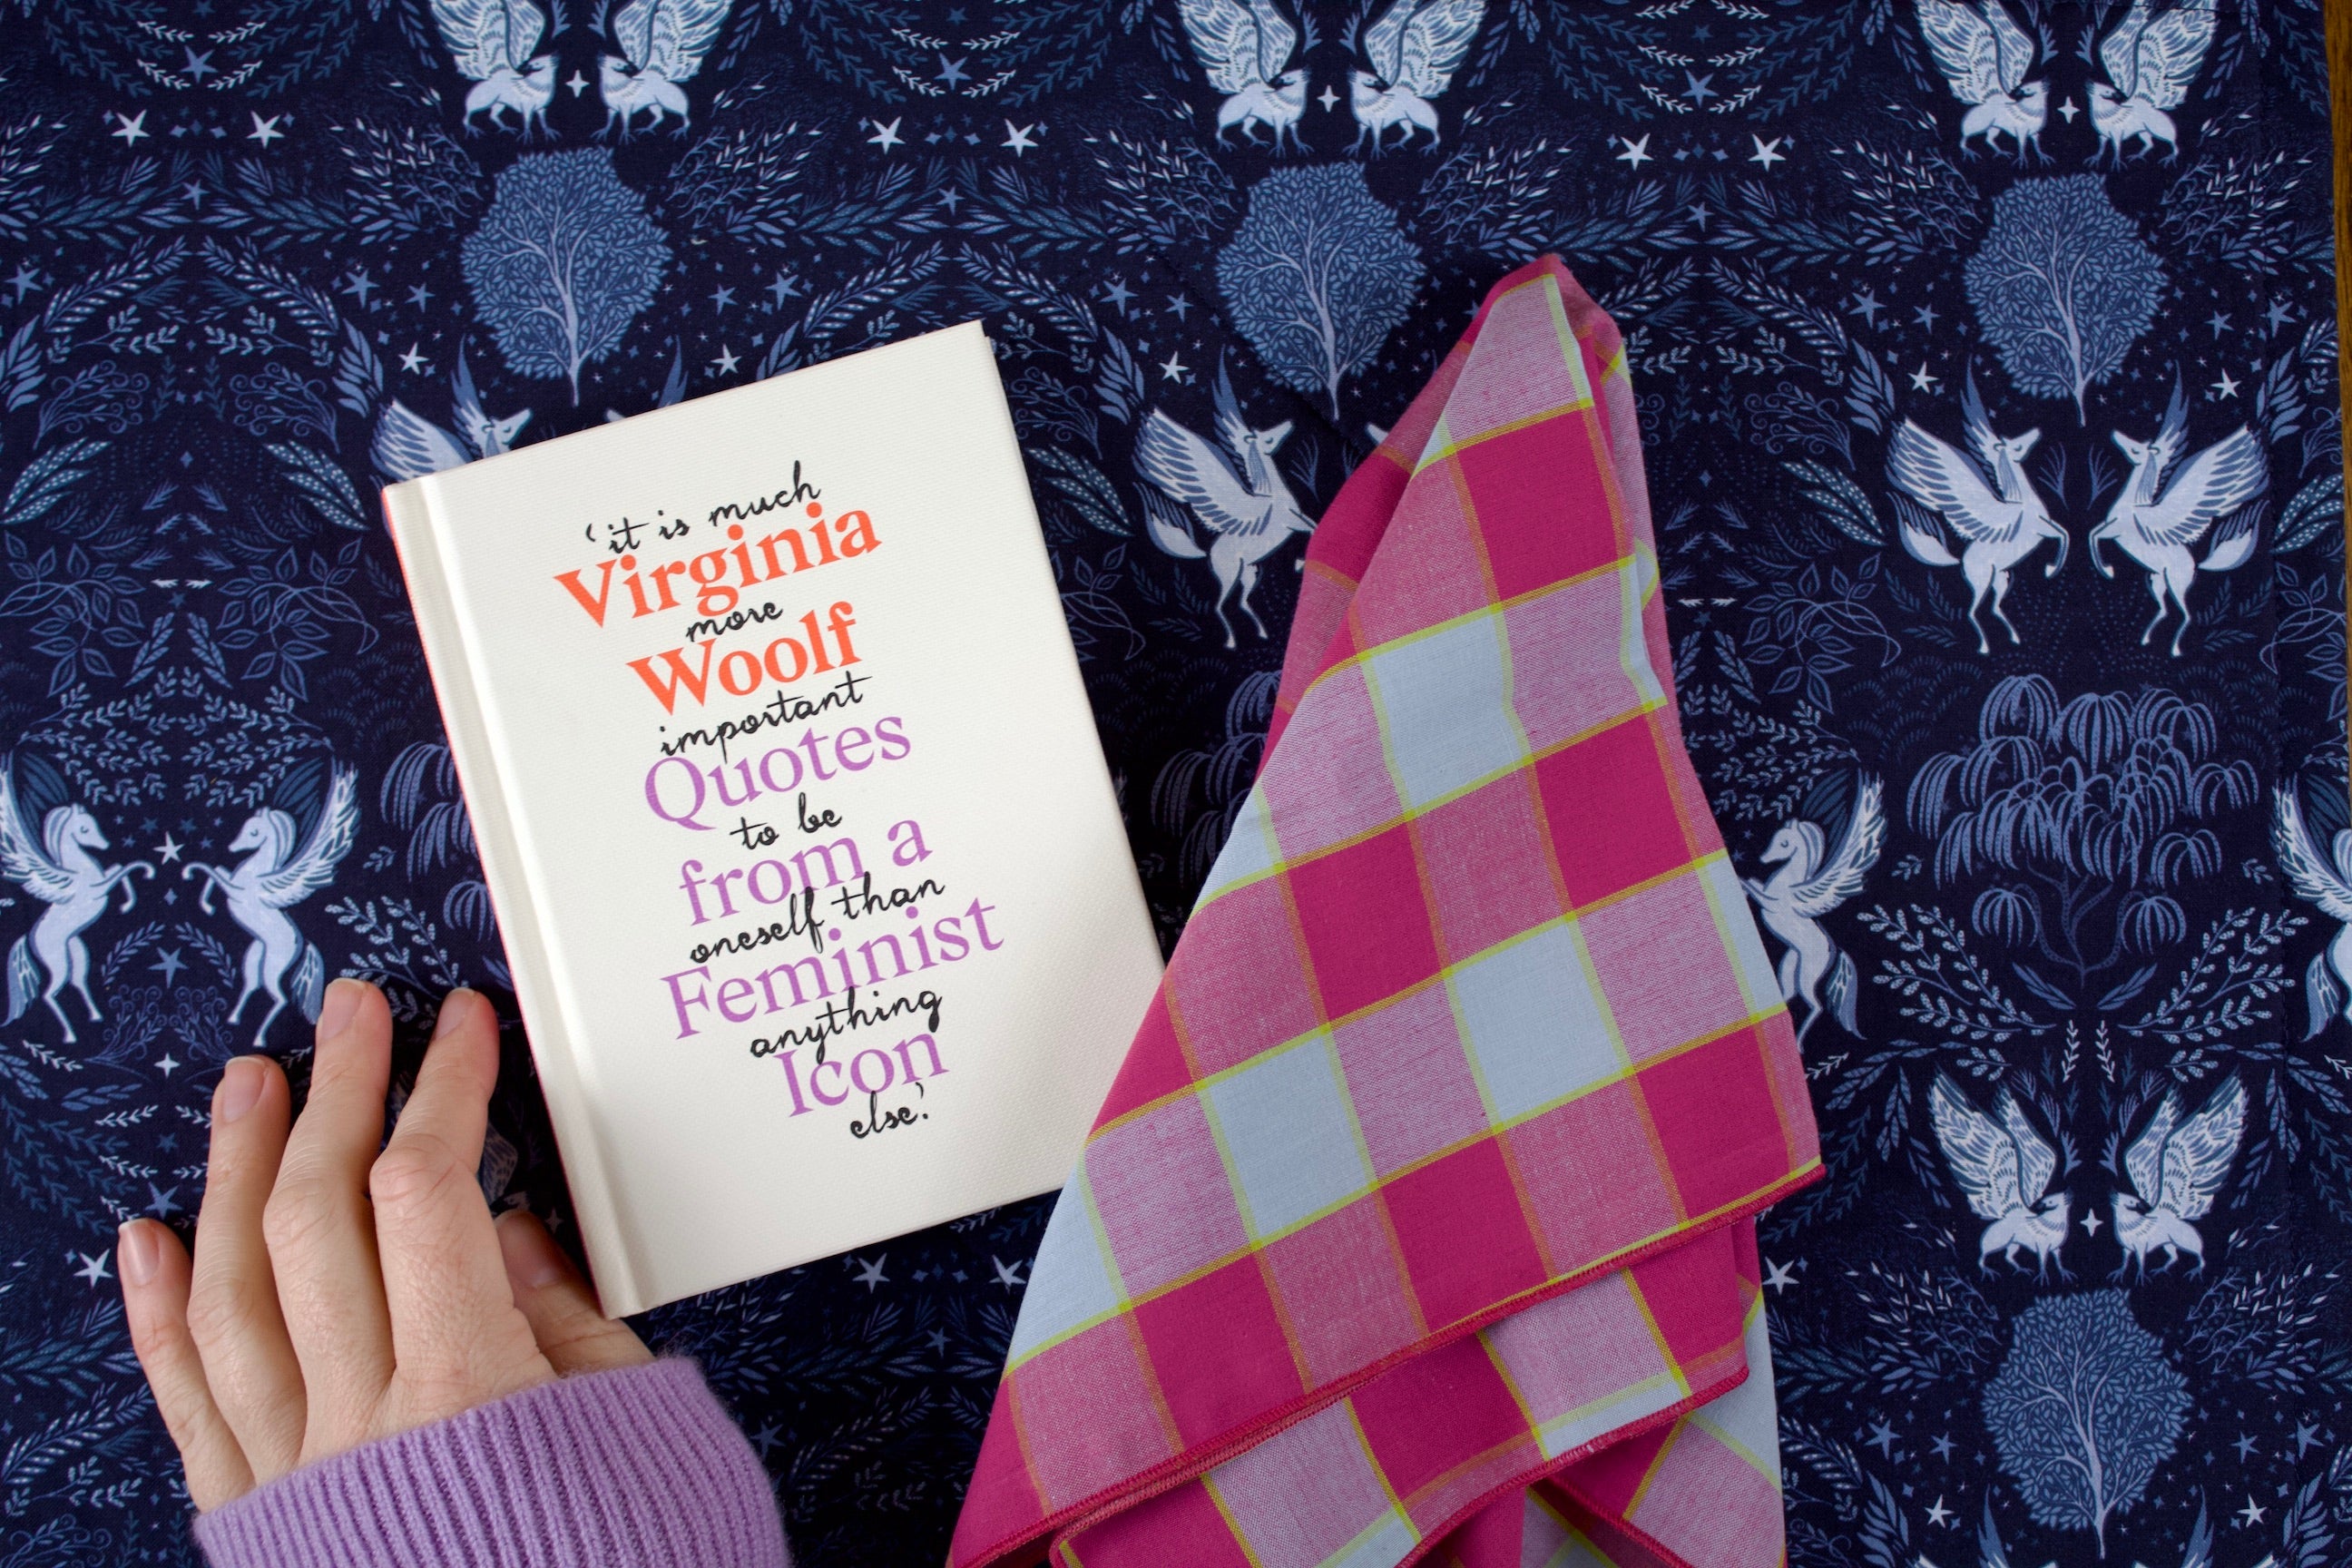 Virginia Woolf: Inspiring Quotes from an Original Feminist Icon